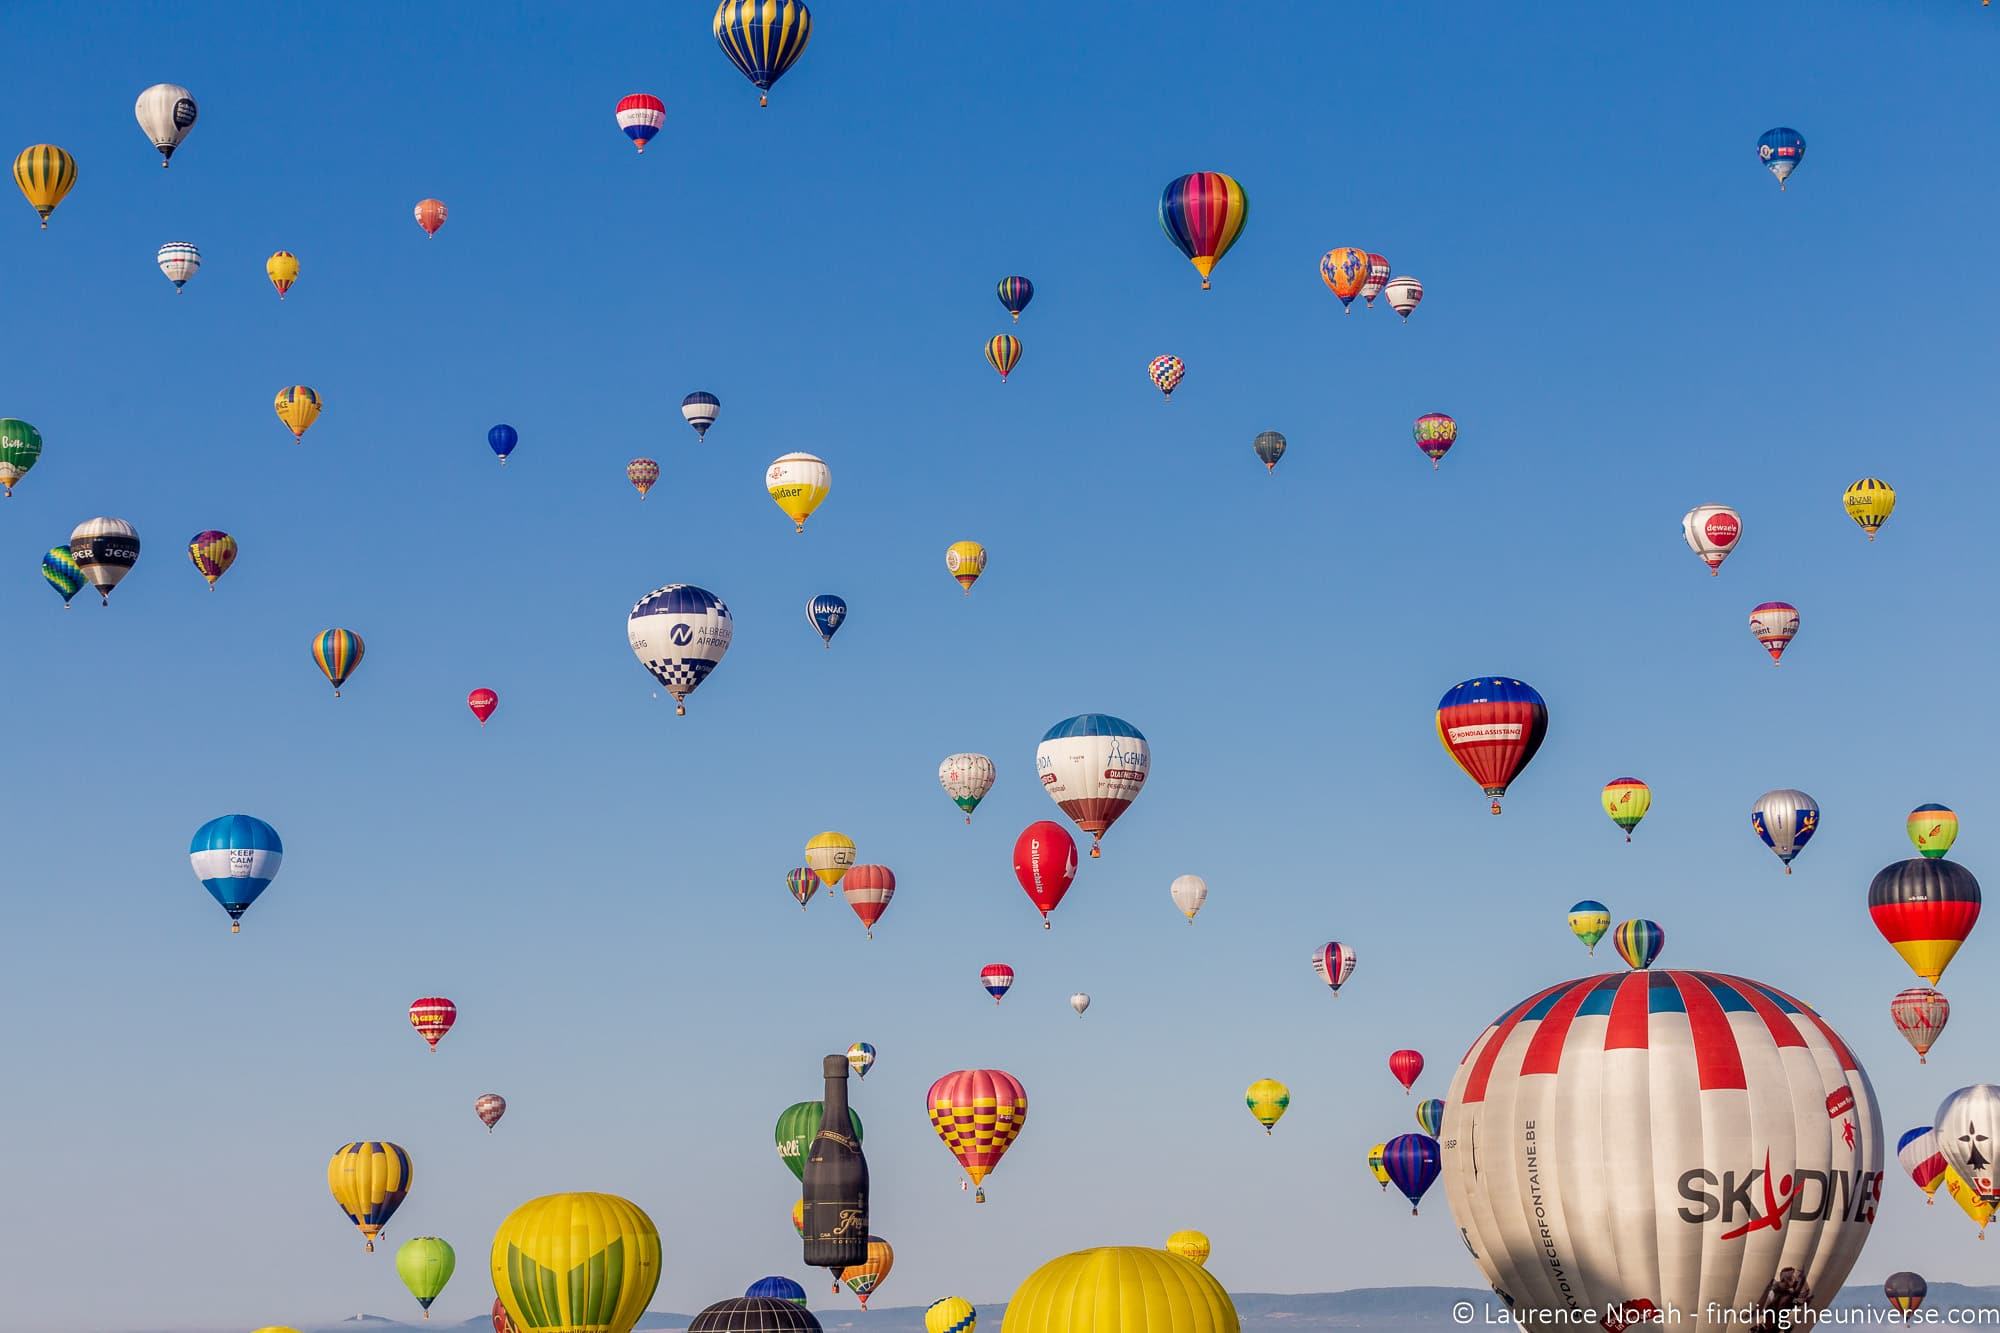 21 Photos from Europe's Largest Hot Air Balloon Event!